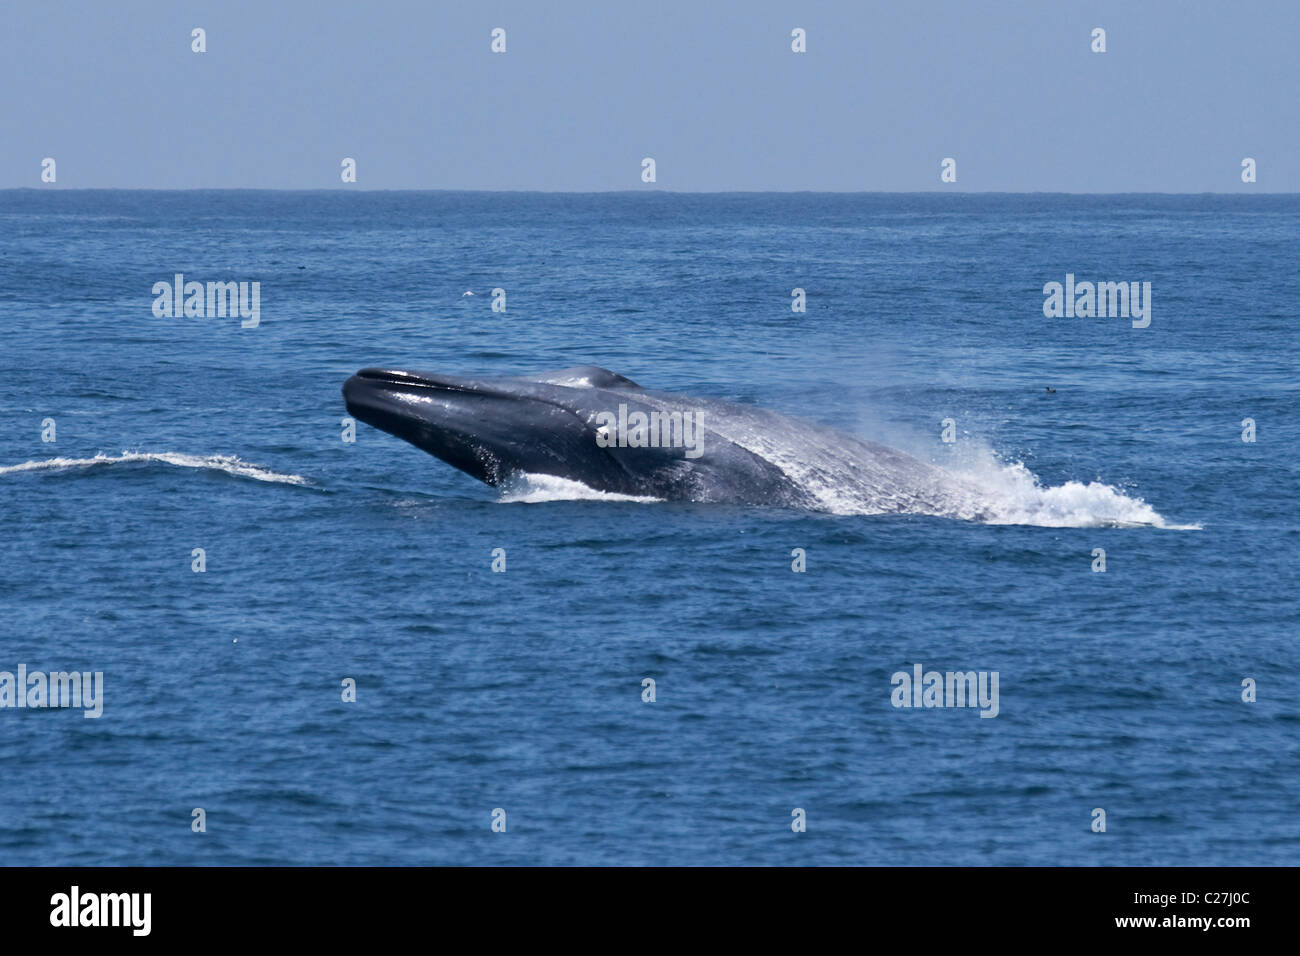 Blue Whale (Balaenoptera Musculus) breaching, extremely rare unusual image. Monterey, Pacific Ocean. NOT A DIGITAL MANIPULATION. Stock Photo